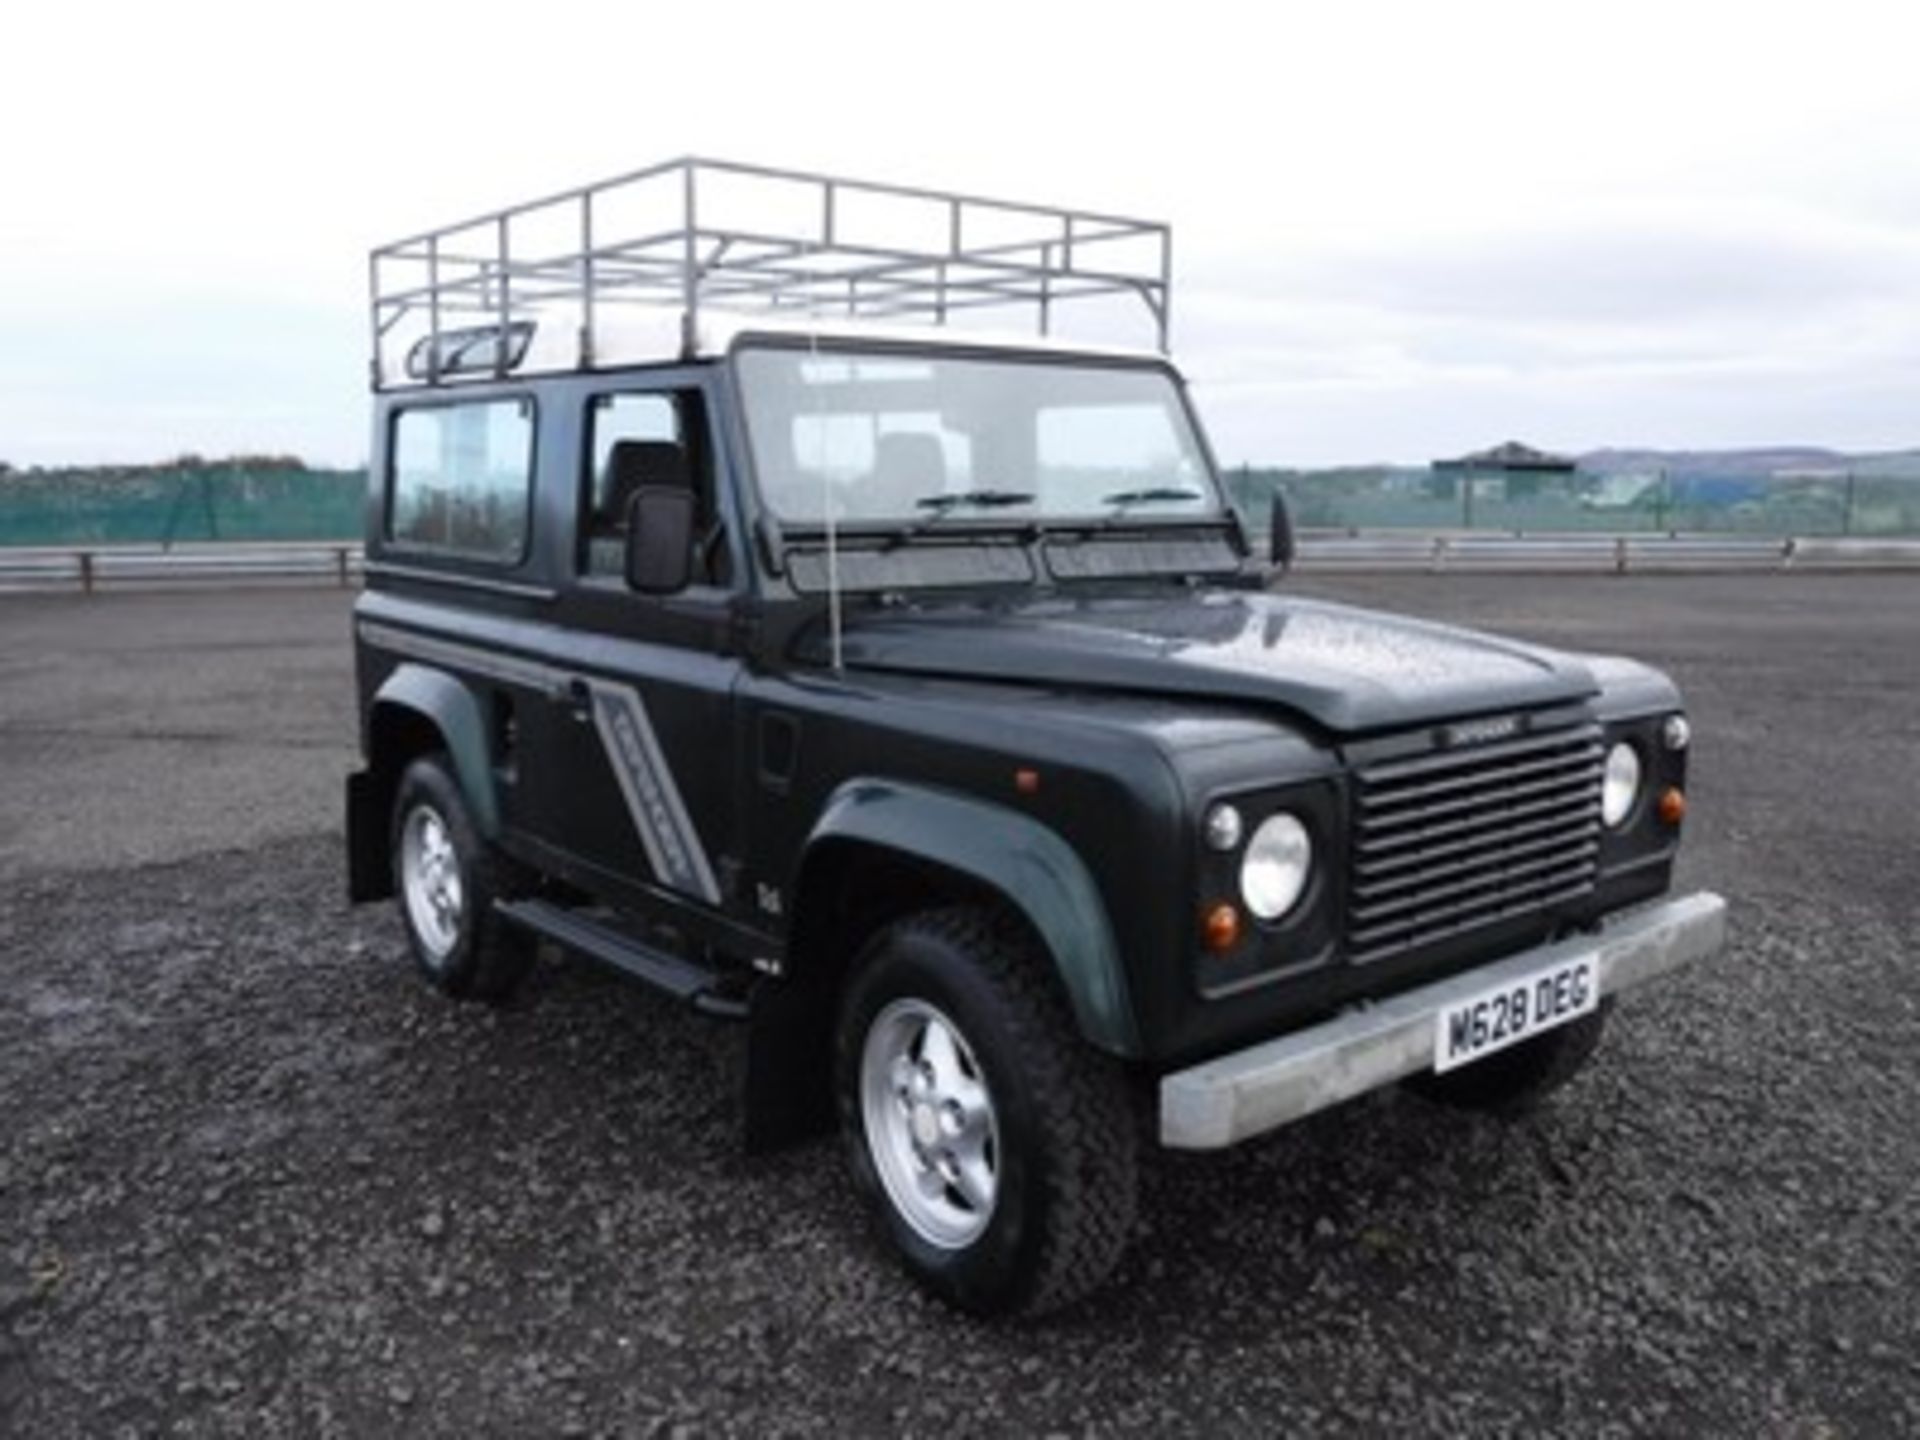 LAND ROVER 90 DEFENDER COUNTY SW TDI - 2495cc - Image 2 of 16